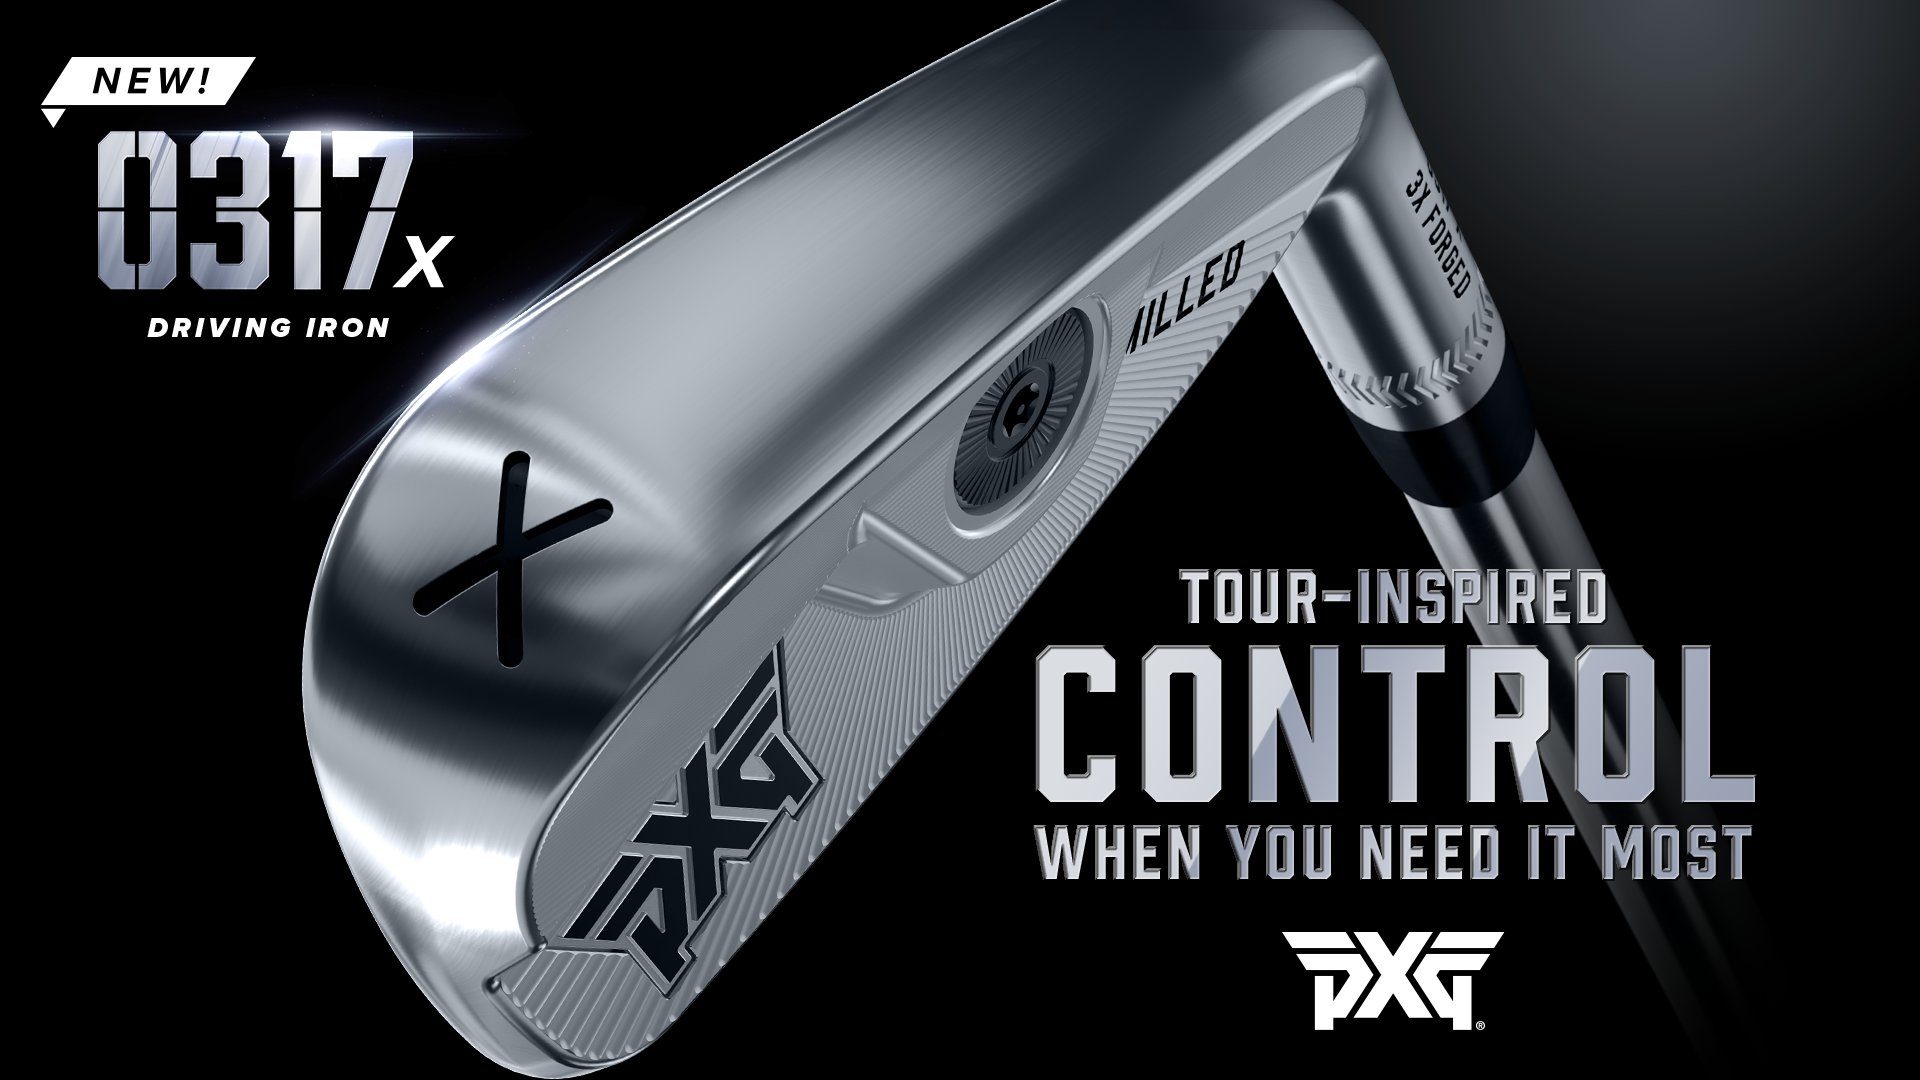 The X Factor: PXG’s New 0317 X Driving Iron